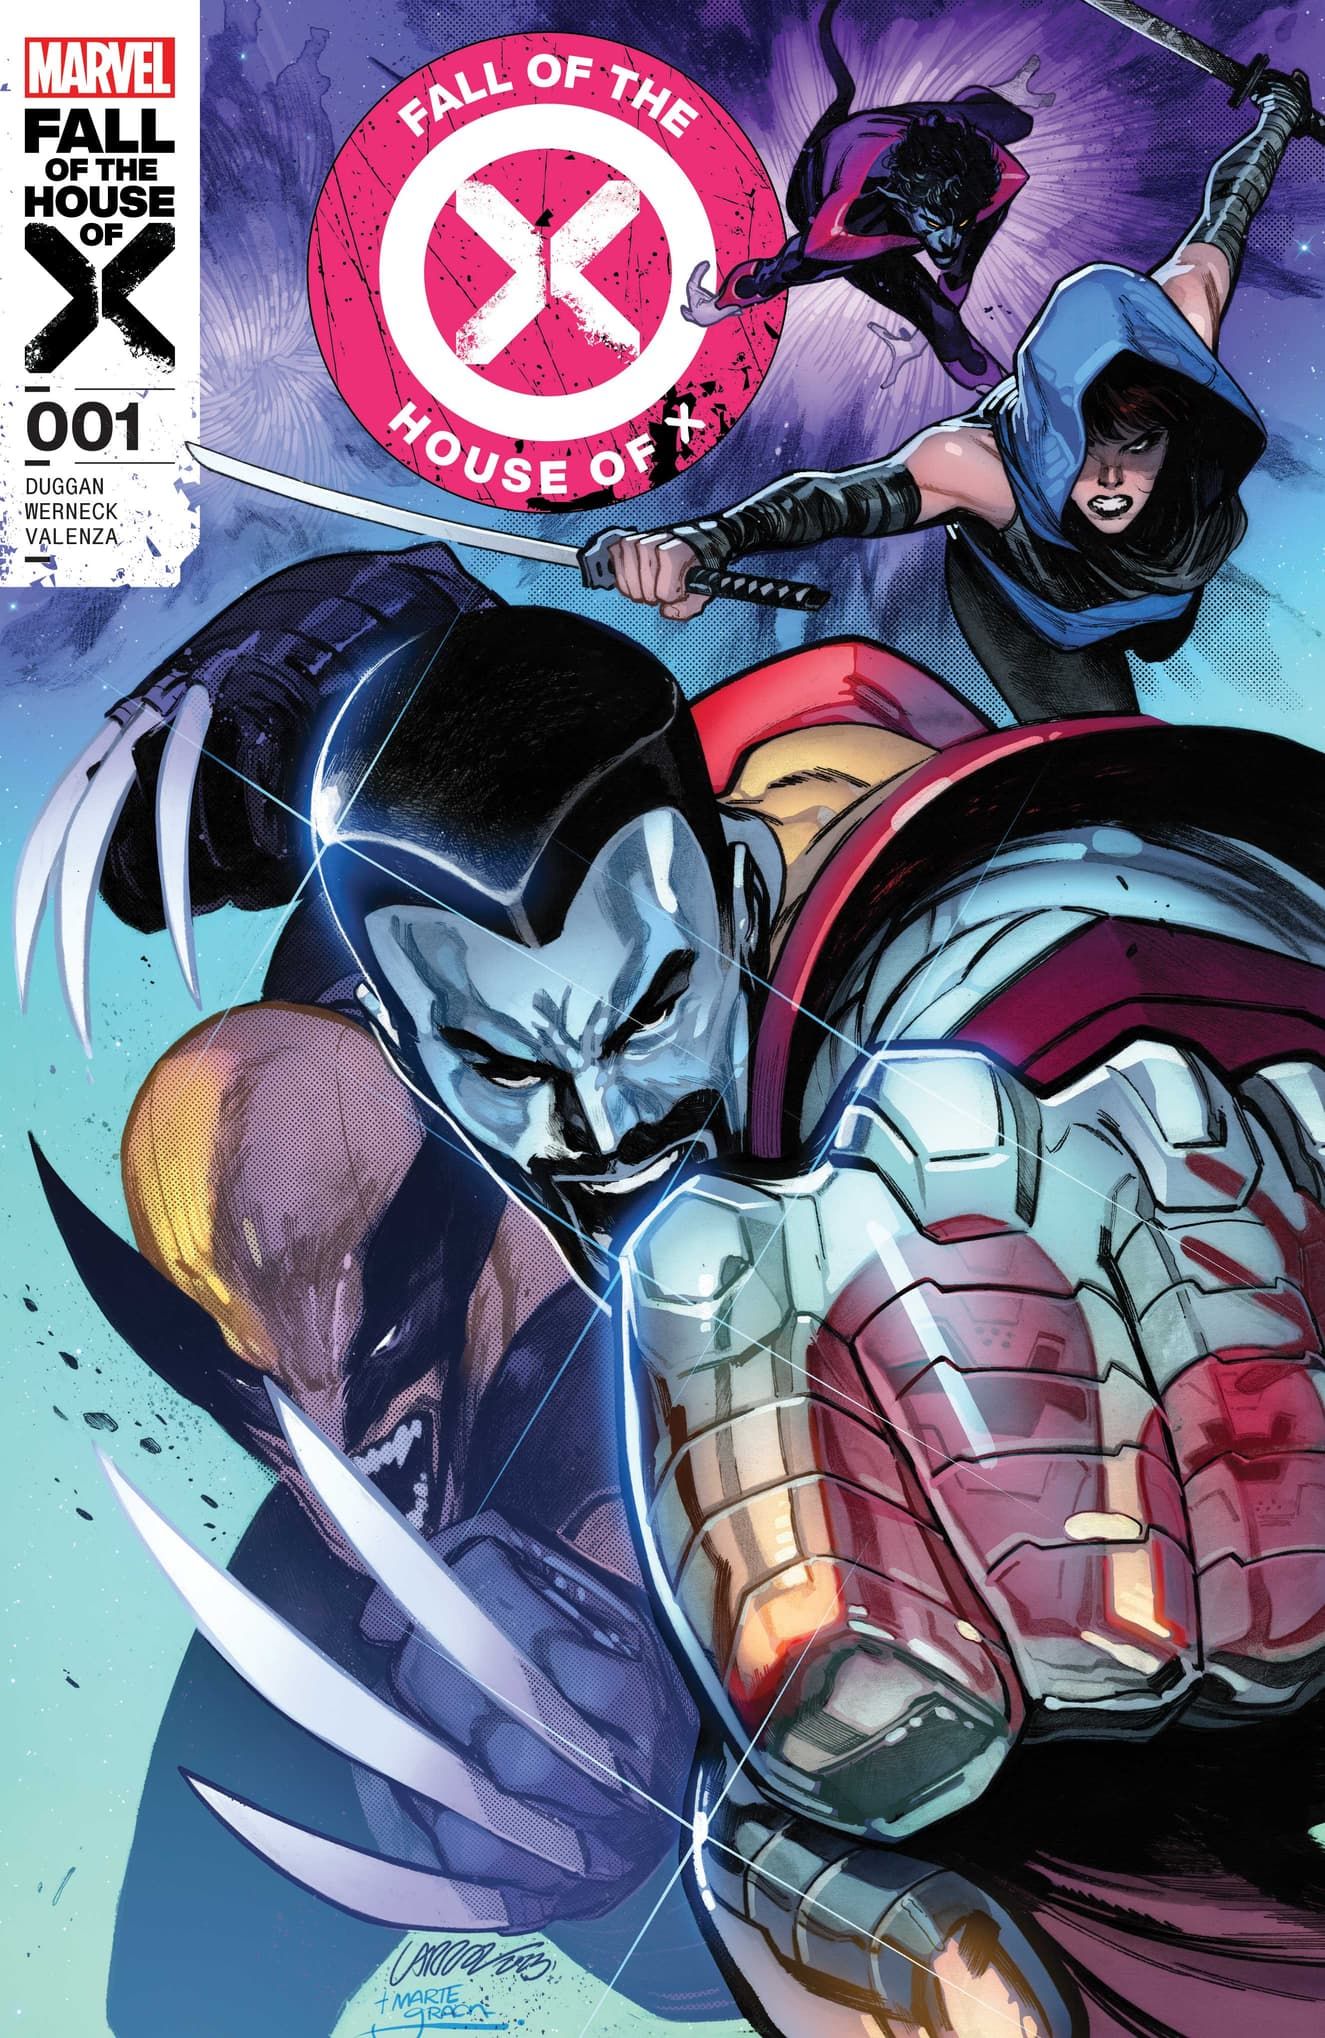 Wolverine, Colossus, Shadowkat, and Nightcrawler leap into action